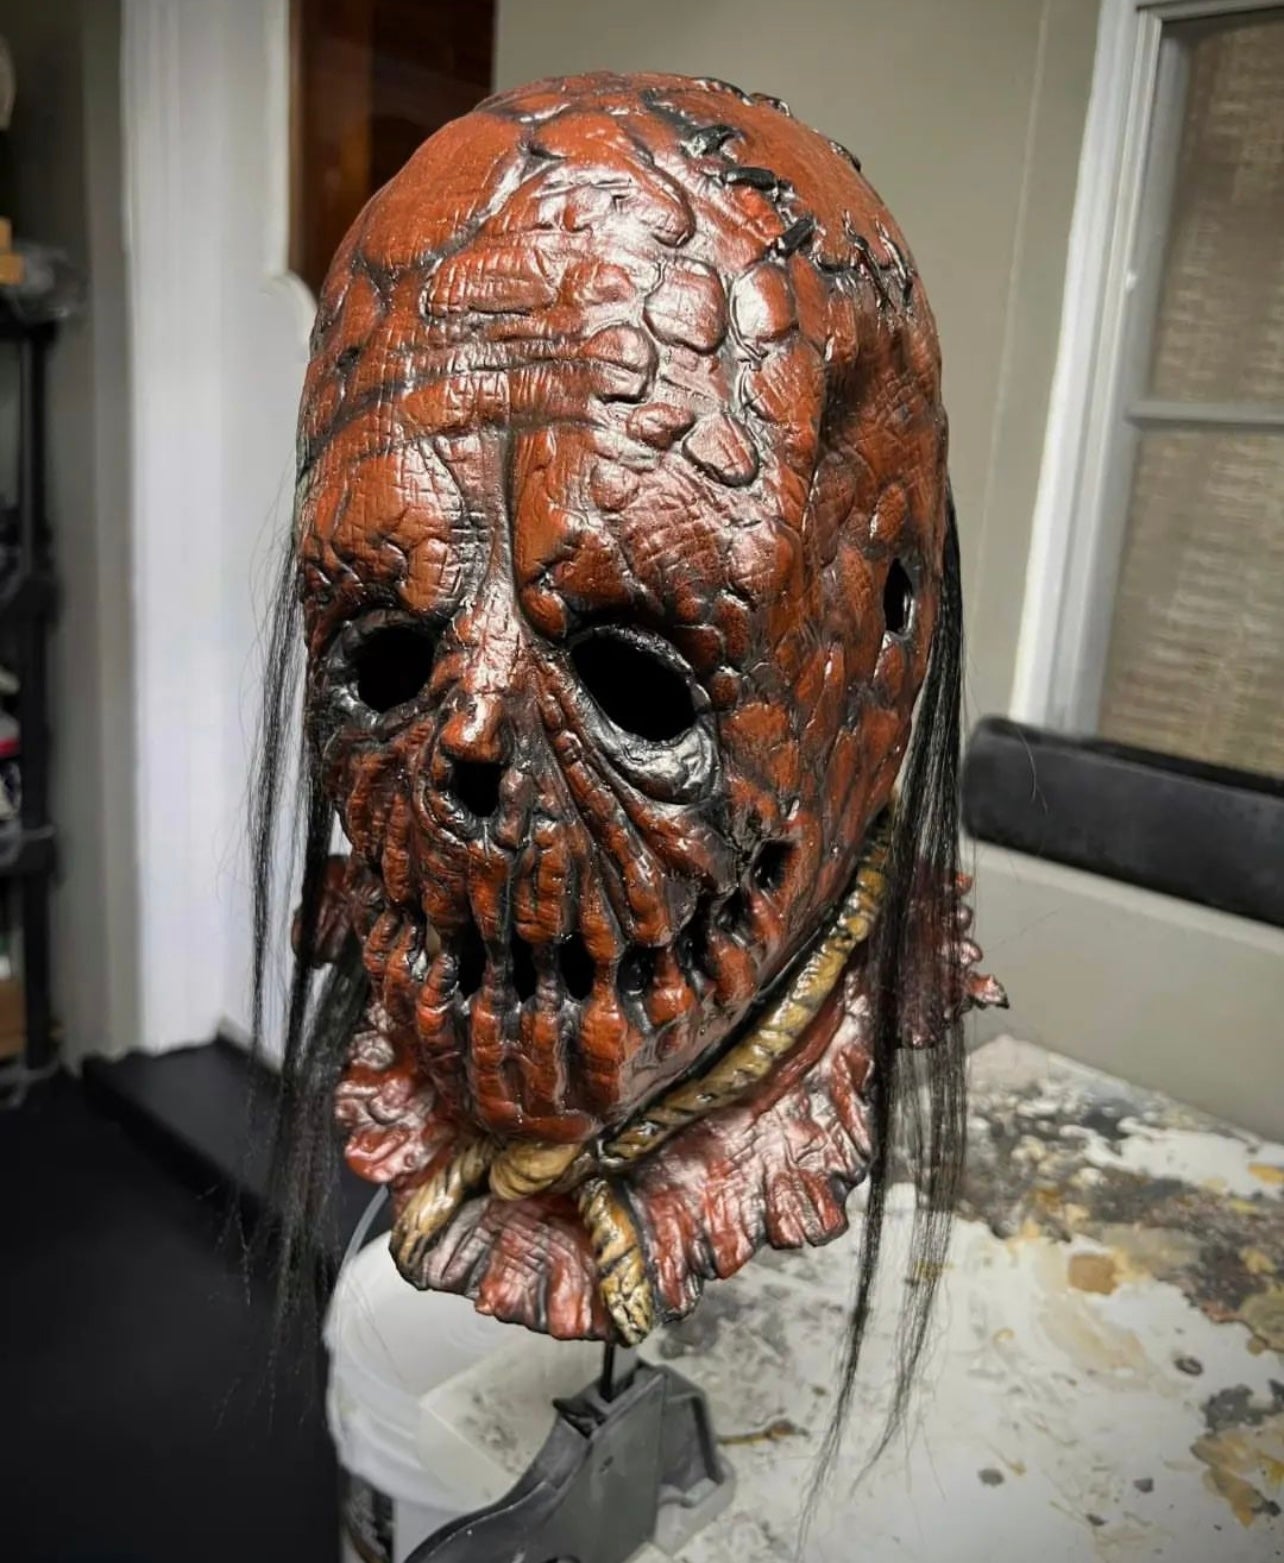 The CrowEater Mask